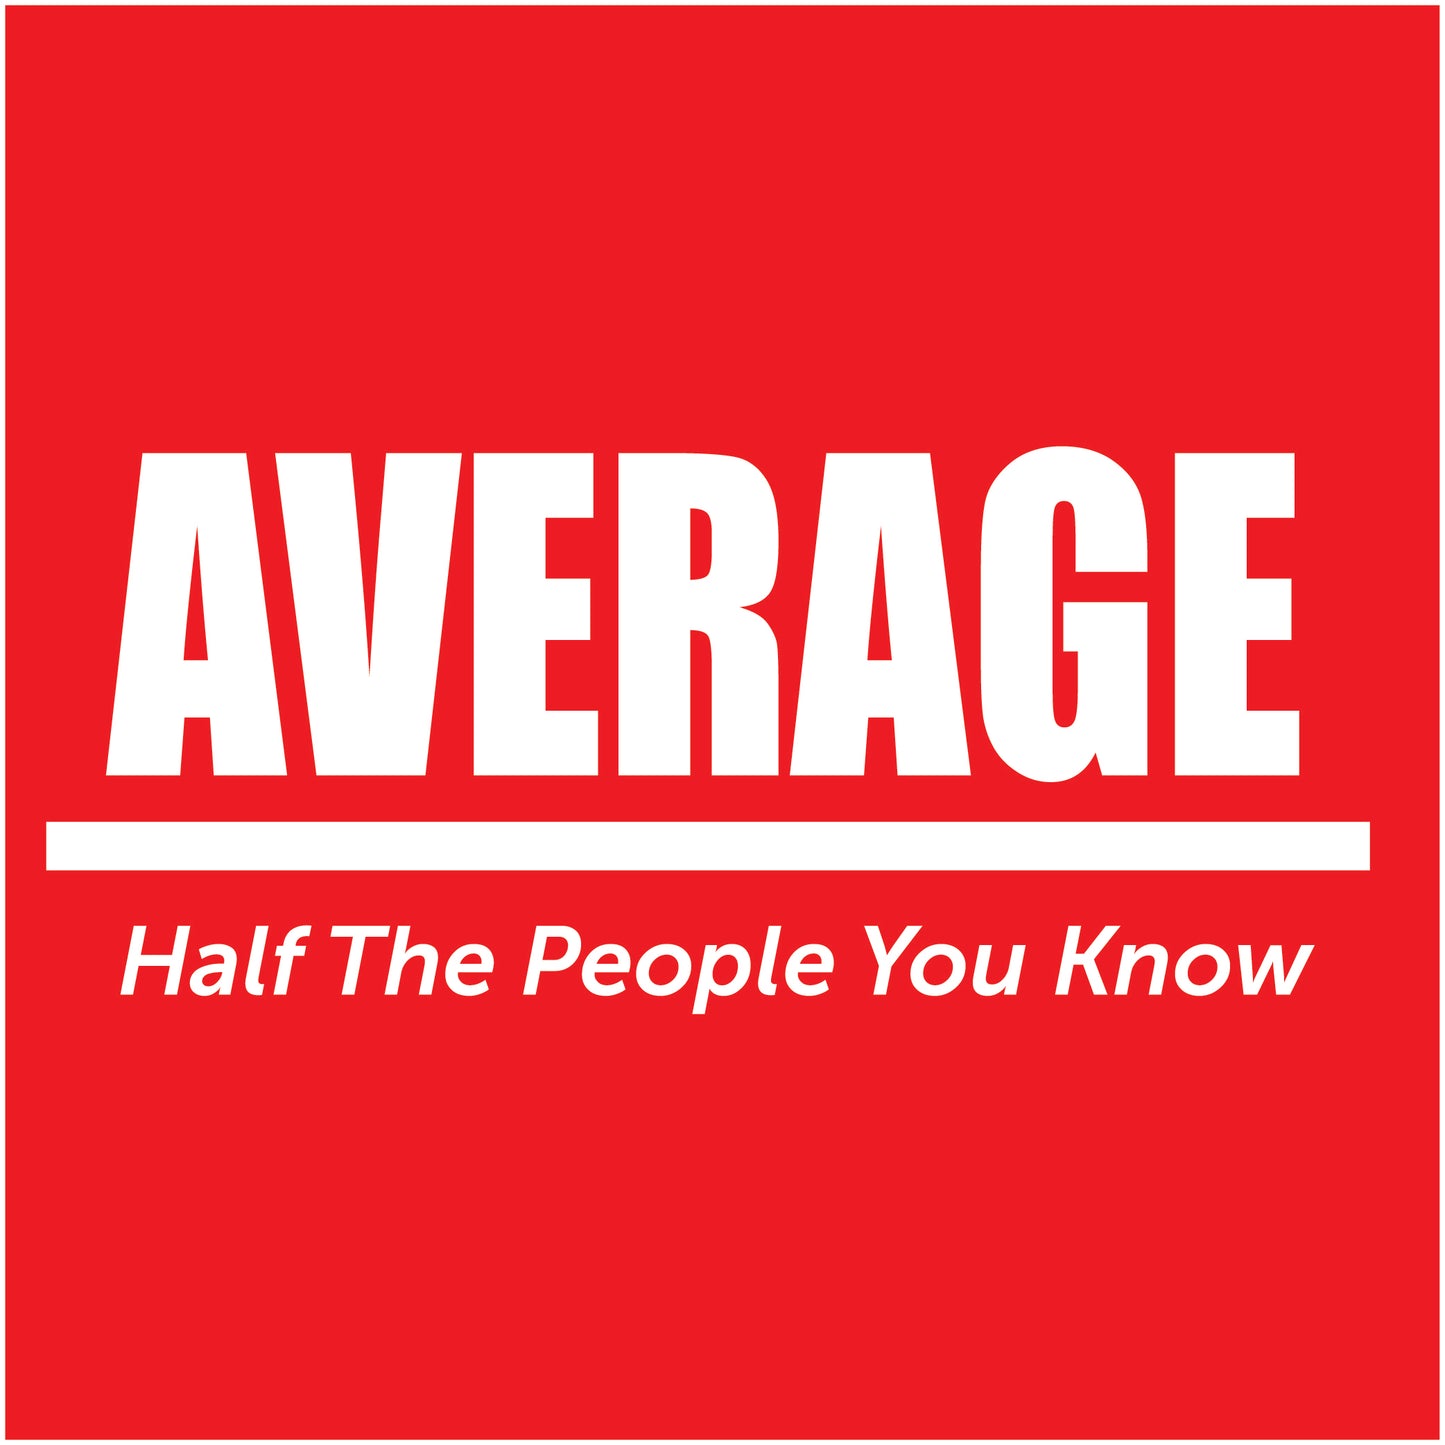 Average Half The People You Know